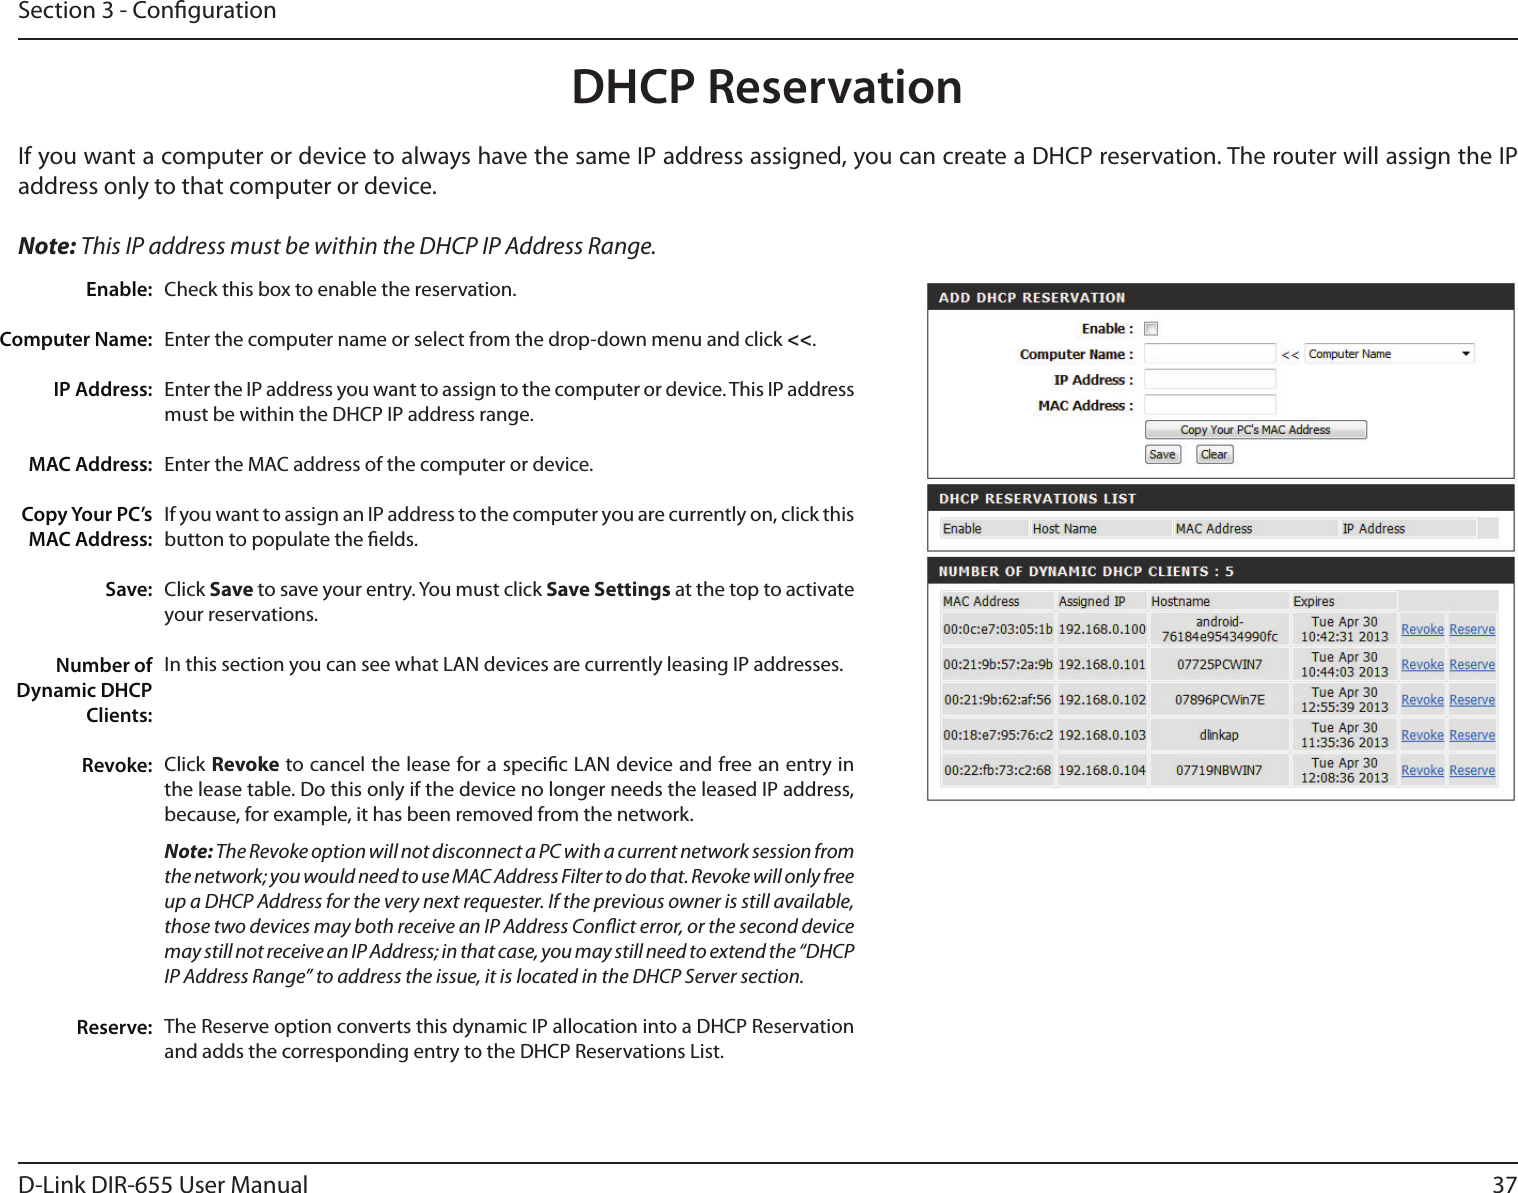 37D-Link DIR-655 User ManualSection 3 - CongurationDHCP ReservationIf you want a computer or device to always have the same IP address assigned, you can create a DHCP reservation. The router will assign the IP address only to that computer or device. Note: This IP address must be within the DHCP IP Address Range.Check this box to enable the reservation.Enter the computer name or select from the drop-down menu and click &lt;&lt;.Enter the IP address you want to assign to the computer or device. This IP address must be within the DHCP IP address range.Enter the MAC address of the computer or device.If you want to assign an IP address to the computer you are currently on, click this button to populate the elds. Click Save to save your entry. You must click Save Settings at the top to activate your reservations. In this section you can see what LAN devices are currently leasing IP addresses.Click Revoke to cancel the lease for a specic LAN device and free an entry in the lease table. Do this only if the device no longer needs the leased IP address, because, for example, it has been removed from the network.Note: The Revoke option will not disconnect a PC with a current network session from the network; you would need to use MAC Address Filter to do that. Revoke will only free up a DHCP Address for the very next requester. If the previous owner is still available, those two devices may both receive an IP Address Conict error, or the second device may still not receive an IP Address; in that case, you may still need to extend the “DHCP IP Address Range” to address the issue, it is located in the DHCP Server section.  The Reserve option converts this dynamic IP allocation into a DHCP Reservation and adds the corresponding entry to the DHCP Reservations List.Enable:Computer Name:IP Address:MAC Address:Copy Your PC’s MAC Address:Save:Number of Dynamic DHCP Clients:Revoke:Reserve: